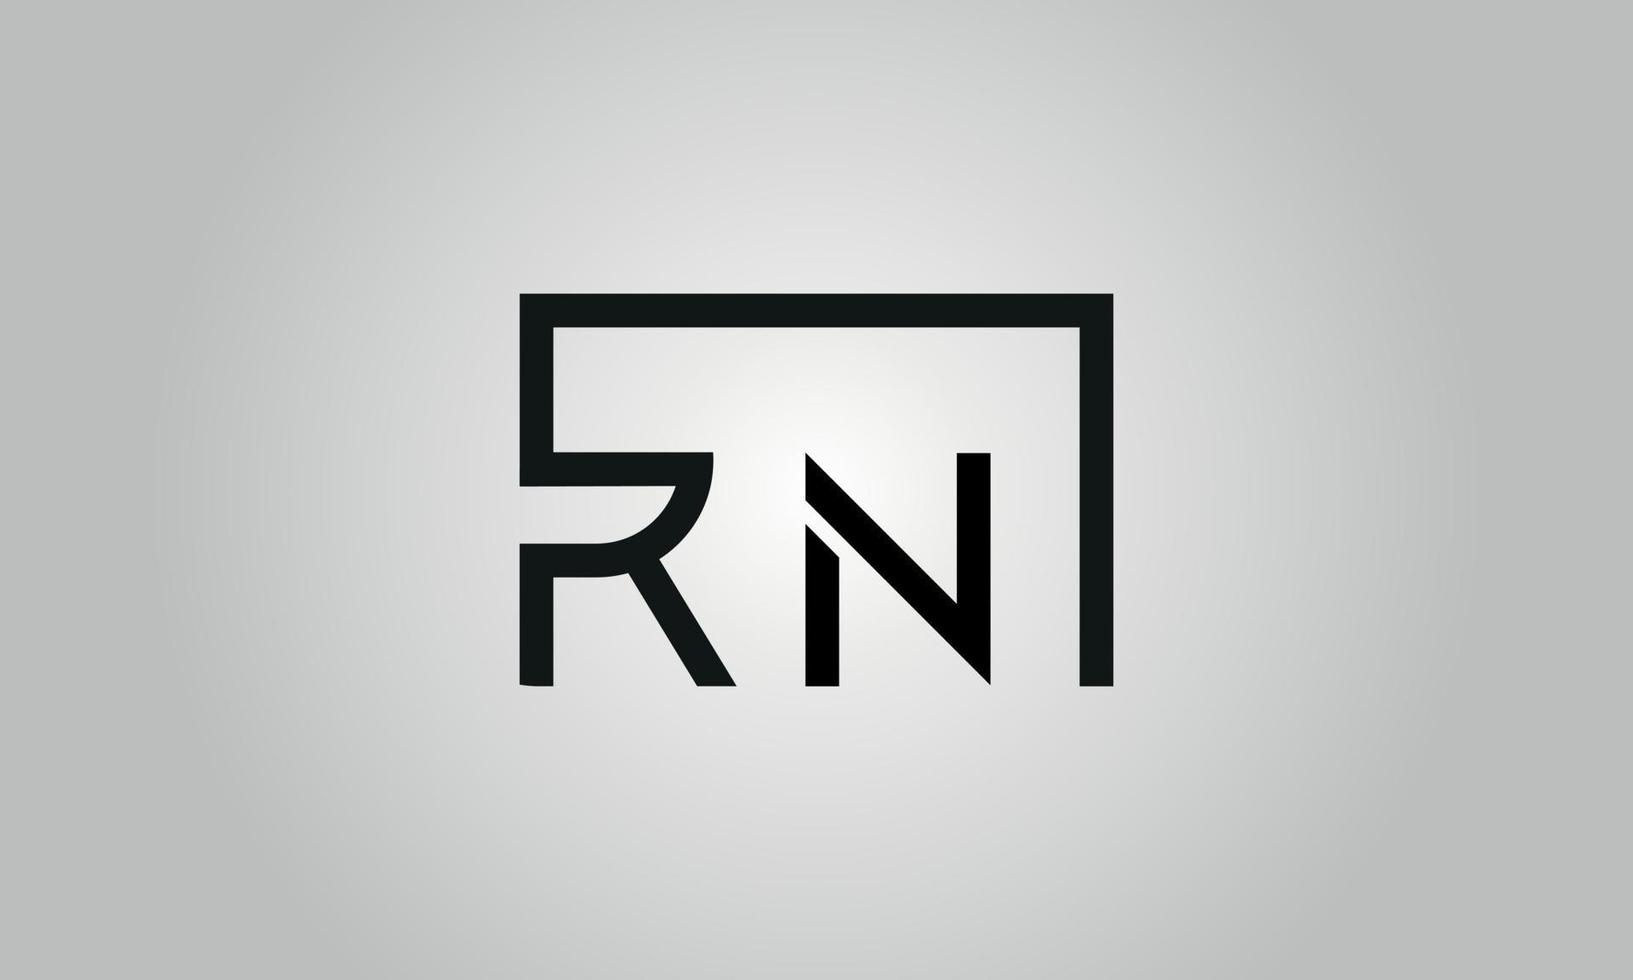 Letter RN logo design. RN logo with square shape in black colors vector free vector template.